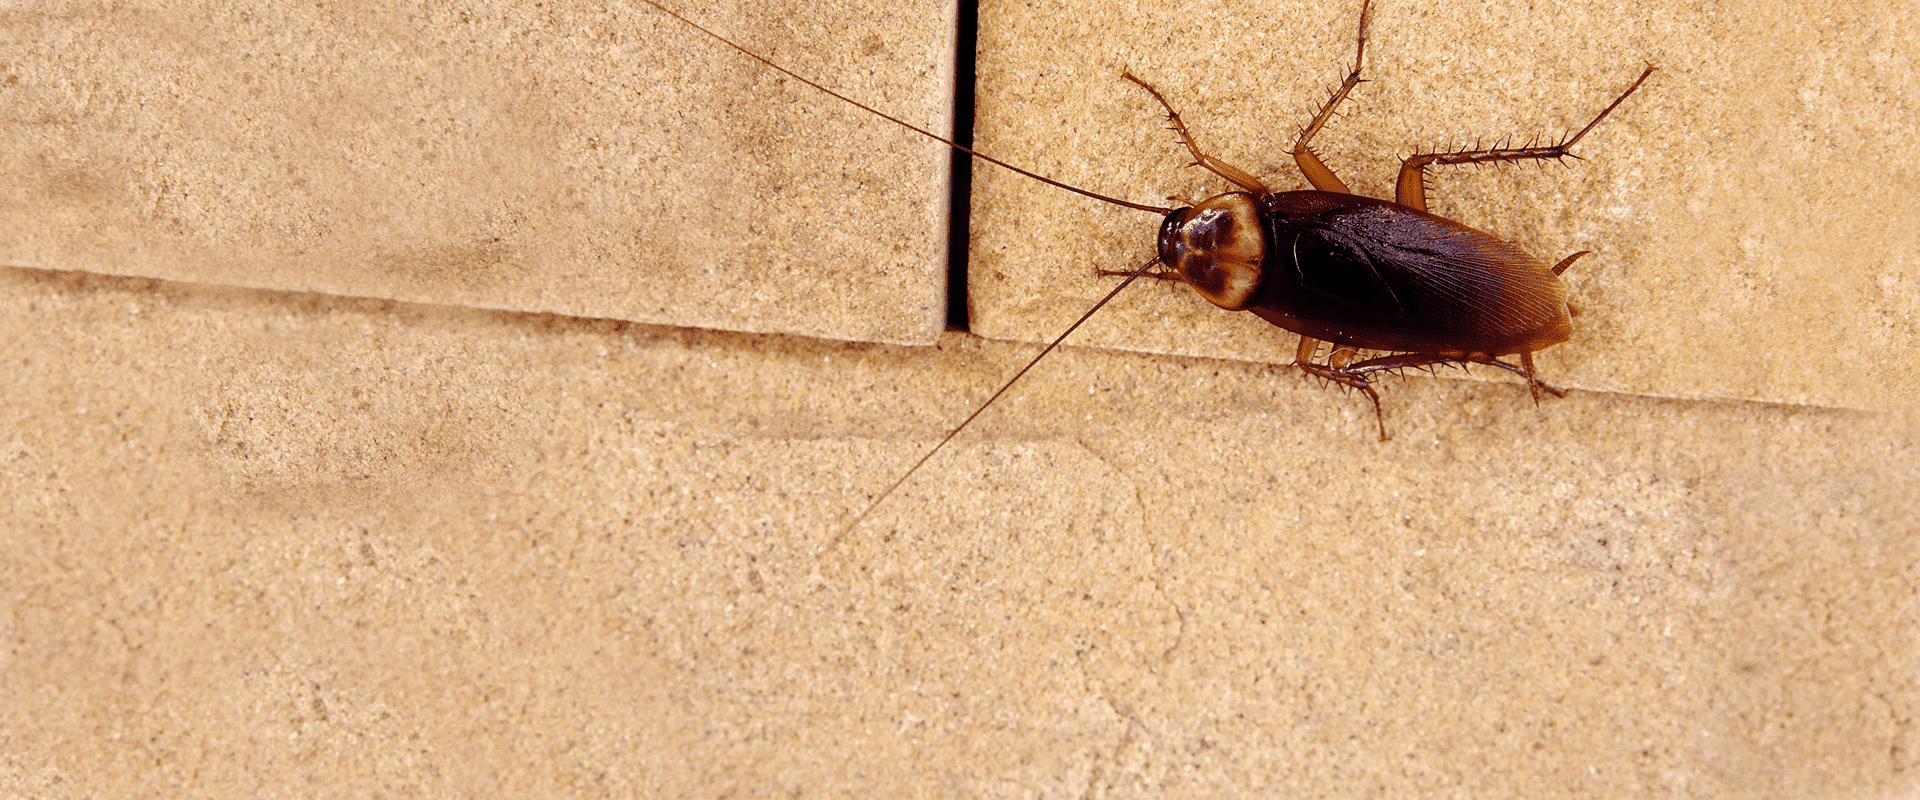 American Cockroach On Wall